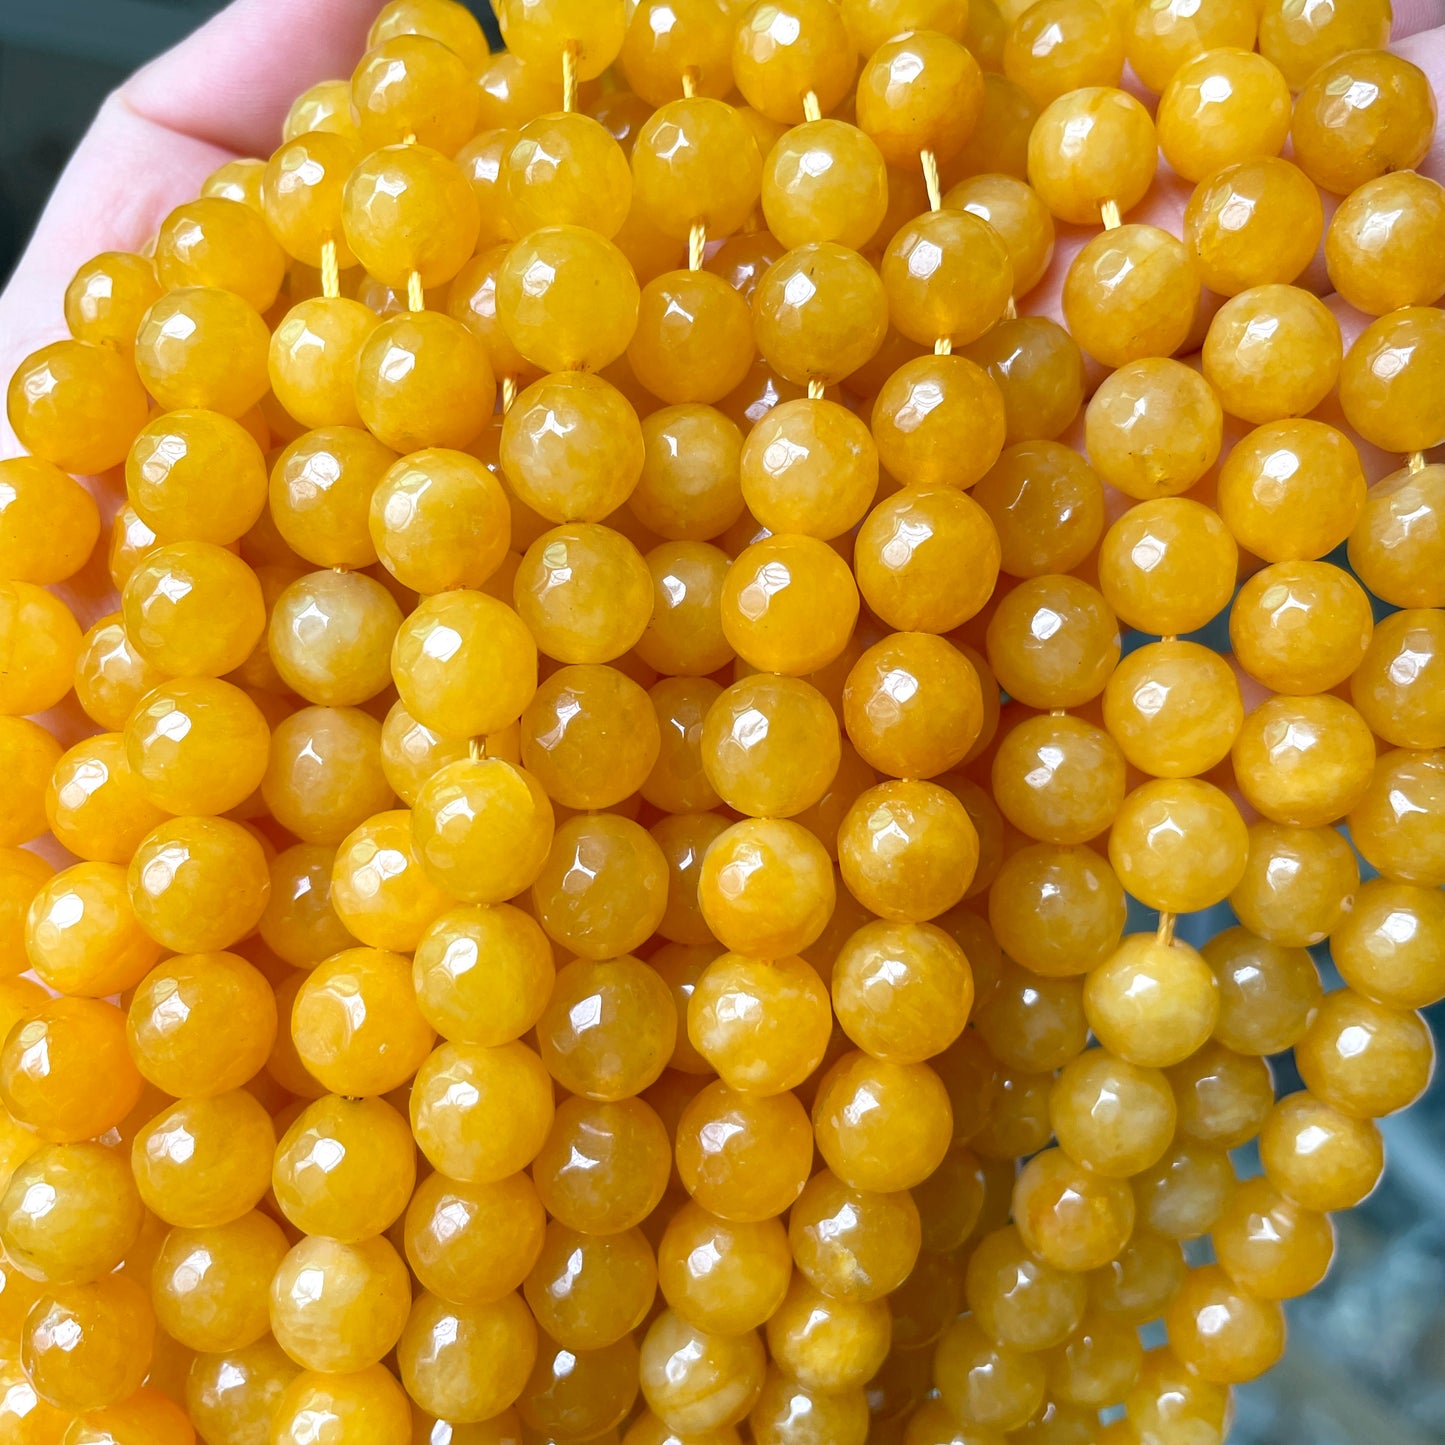 2 Strands/lot 10mm Yellow Faceted Jade Stone Beads Stone Beads Faceted Jade Beads New Beads Arrivals Charms Beads Beyond